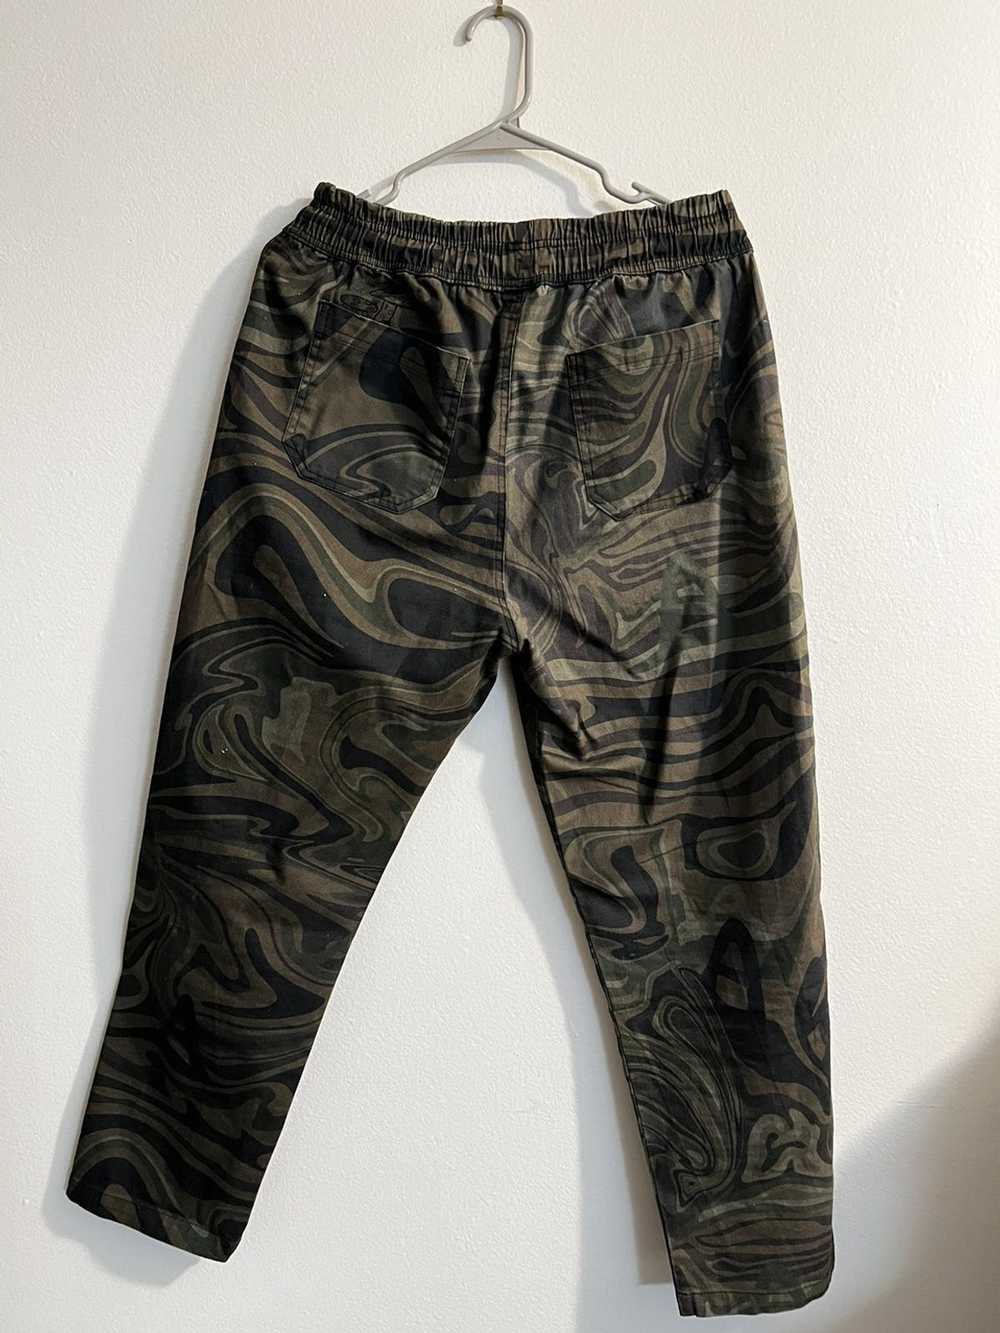 Just Approve × Streetwear Camo pants - image 3